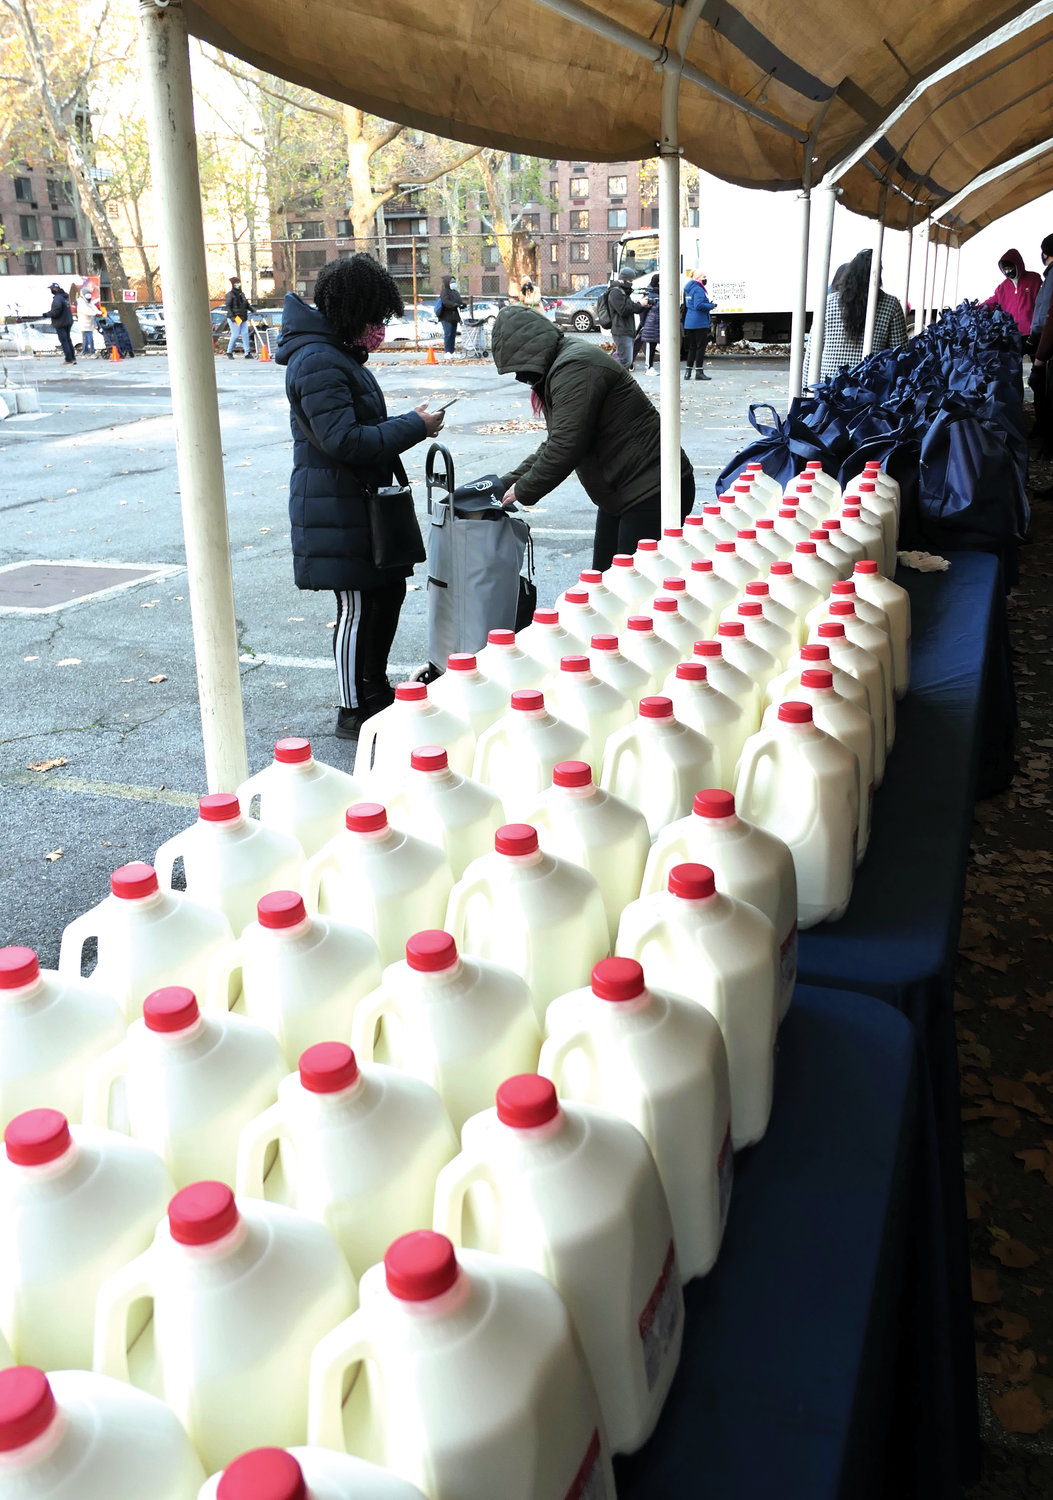 Archdiocesan Catholic Charities distributed 500 turkeys along with the trimmings for a bountiful Thanksgiving meal at the Lt. Joseph P. Kennedy Community Center in Harlem. Plenty of milk was also given out.